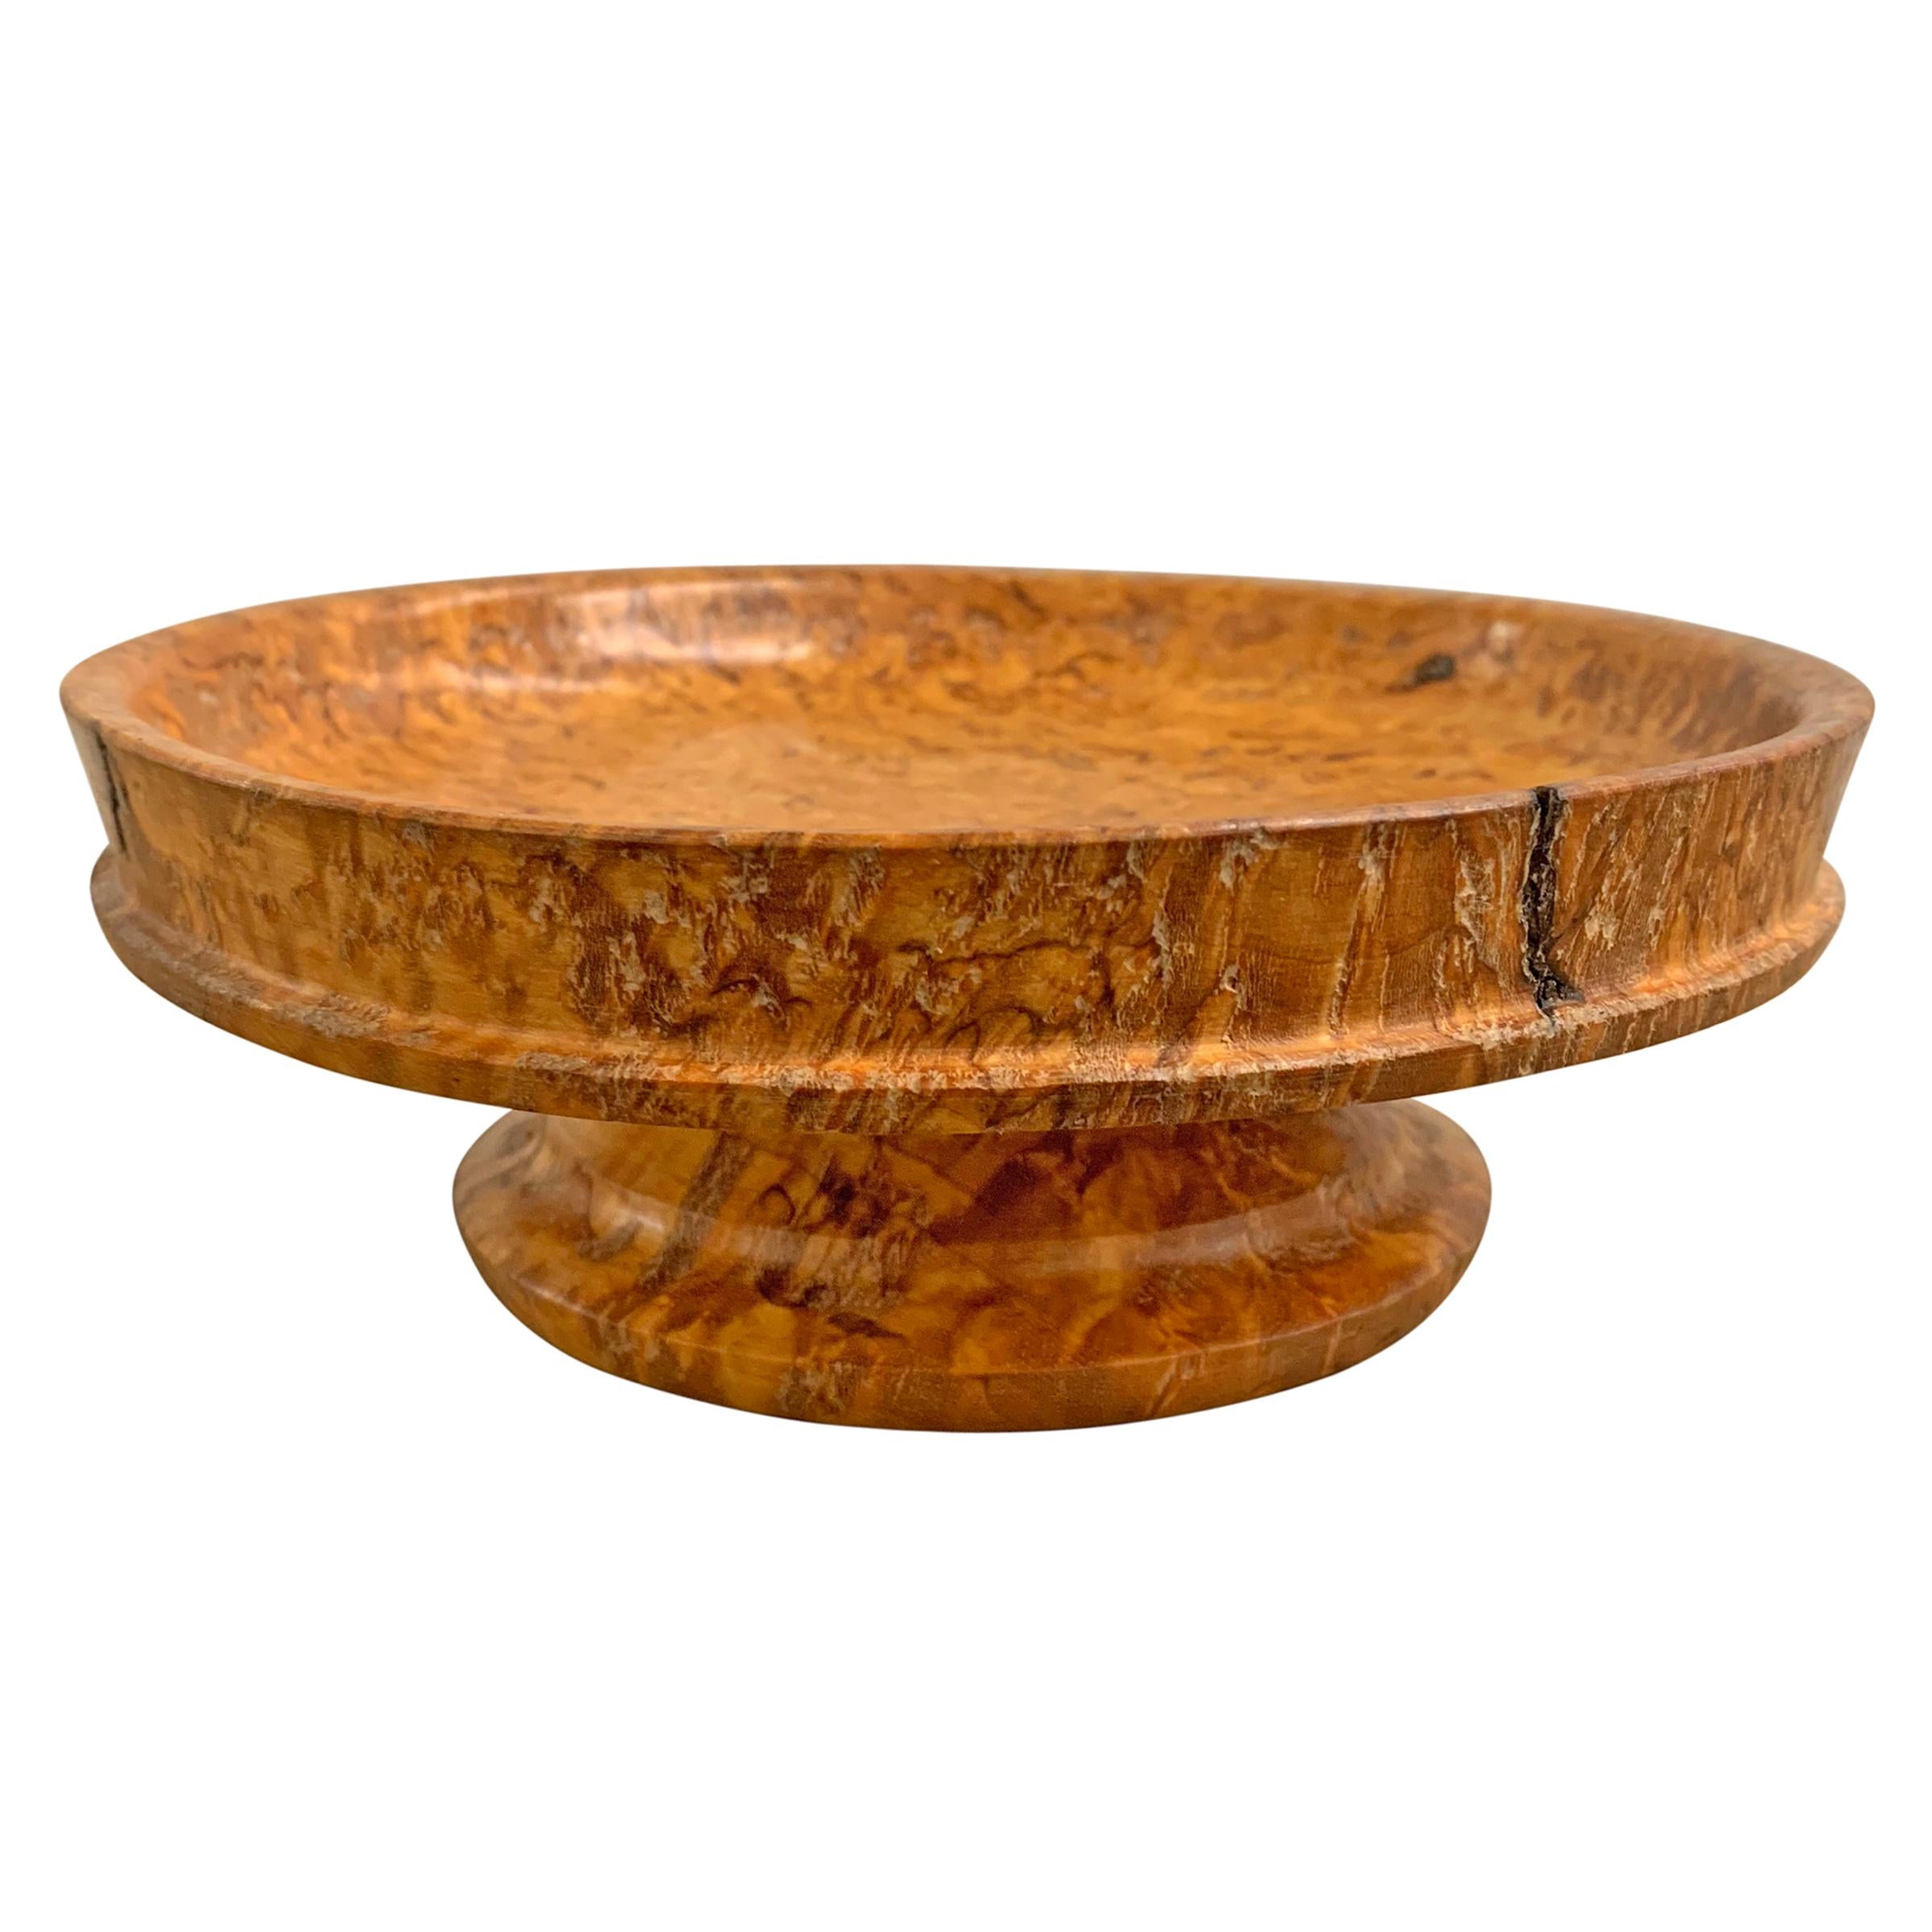 A beautiful mid-20th century Swedish turned burl wood dish with a raised edge detail and a fantastic grain pattern with a golden hue.